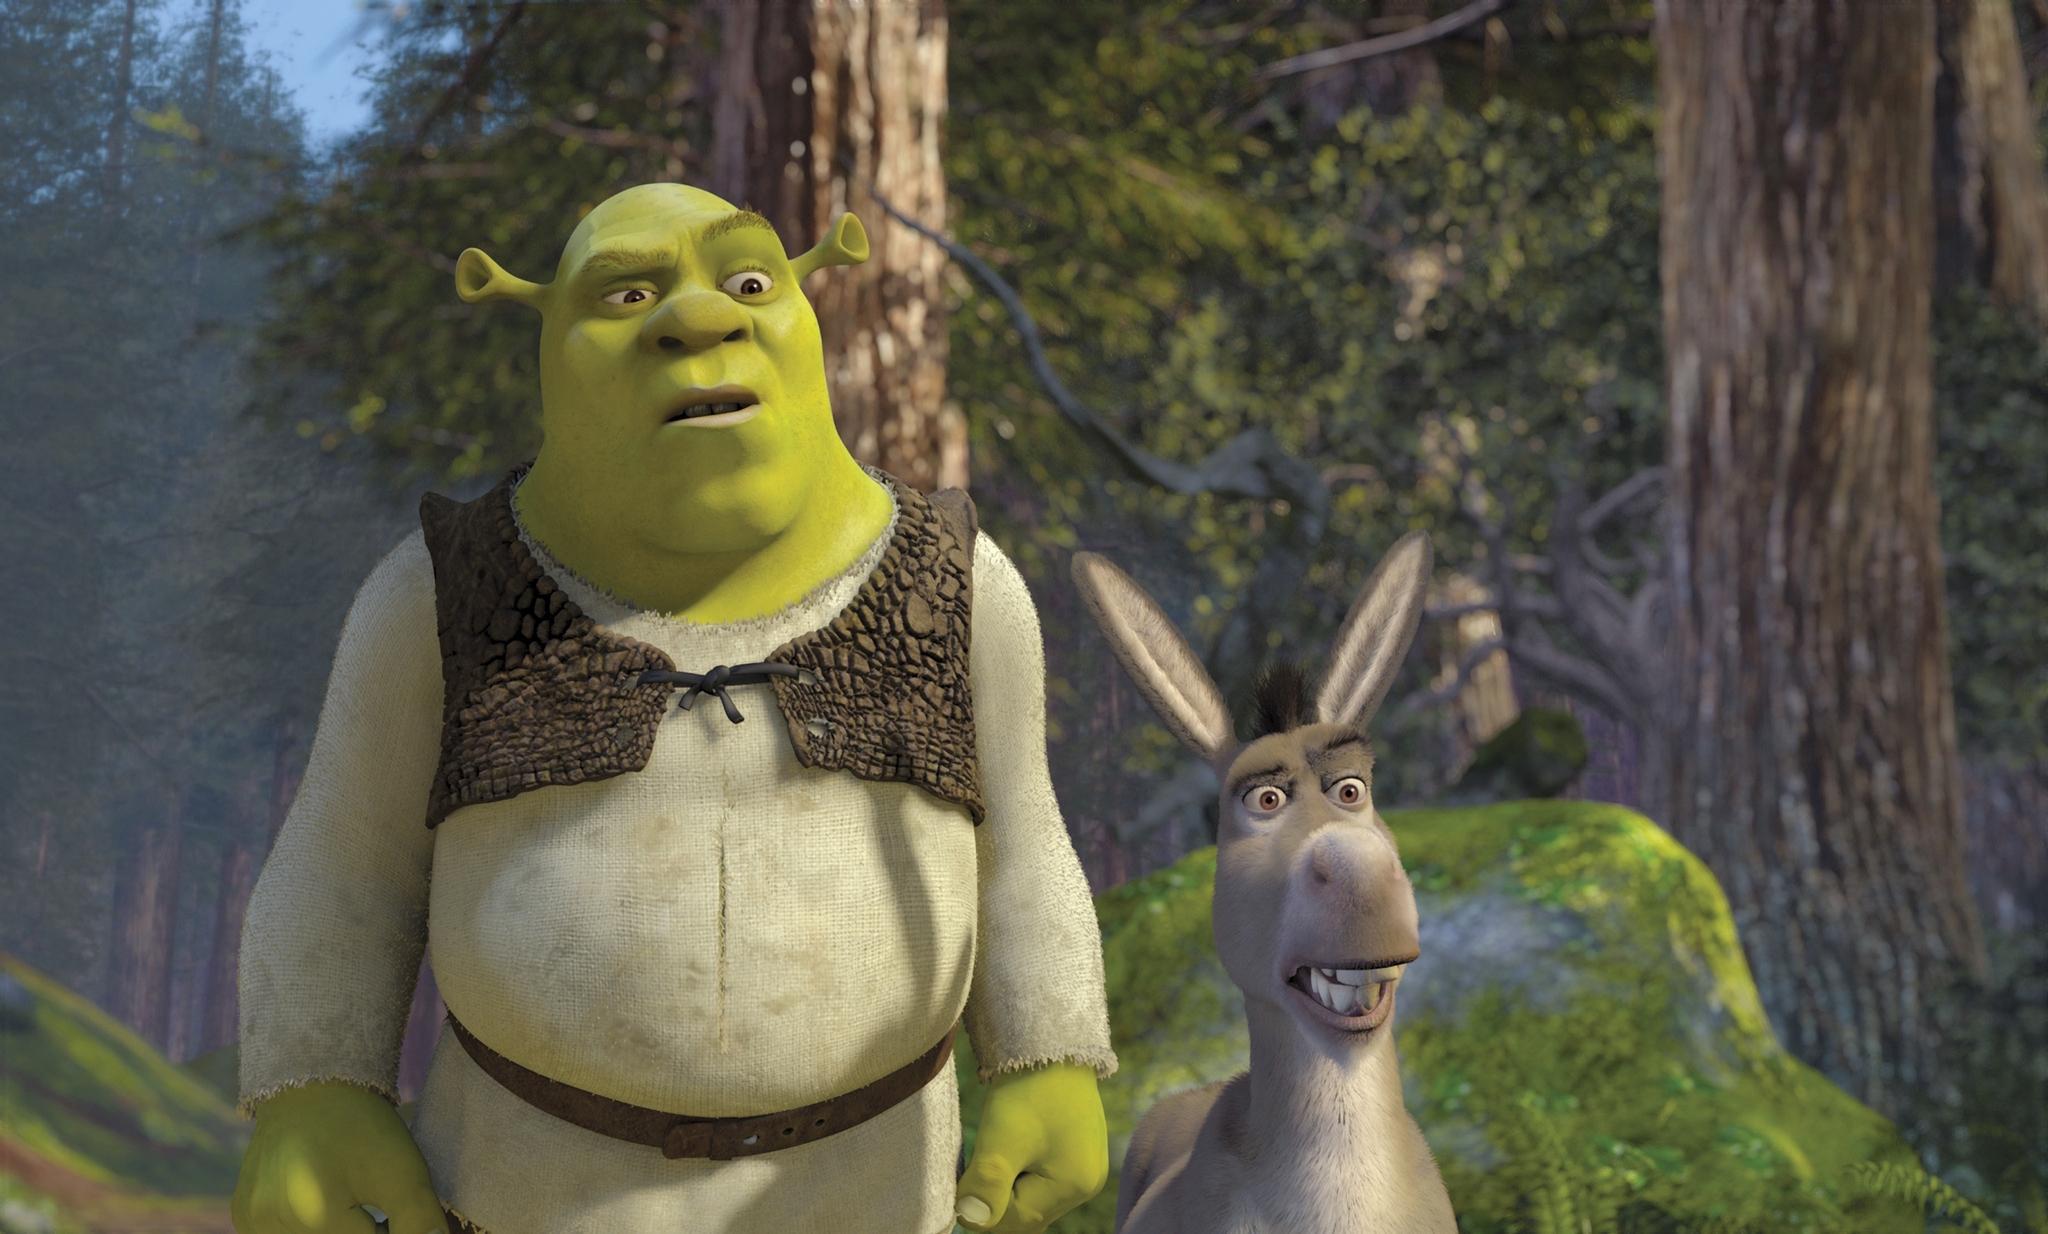 Shrek is getting 'resurrected' as DreamWorks Animation gears up a reboot |  The Independent | The Independent